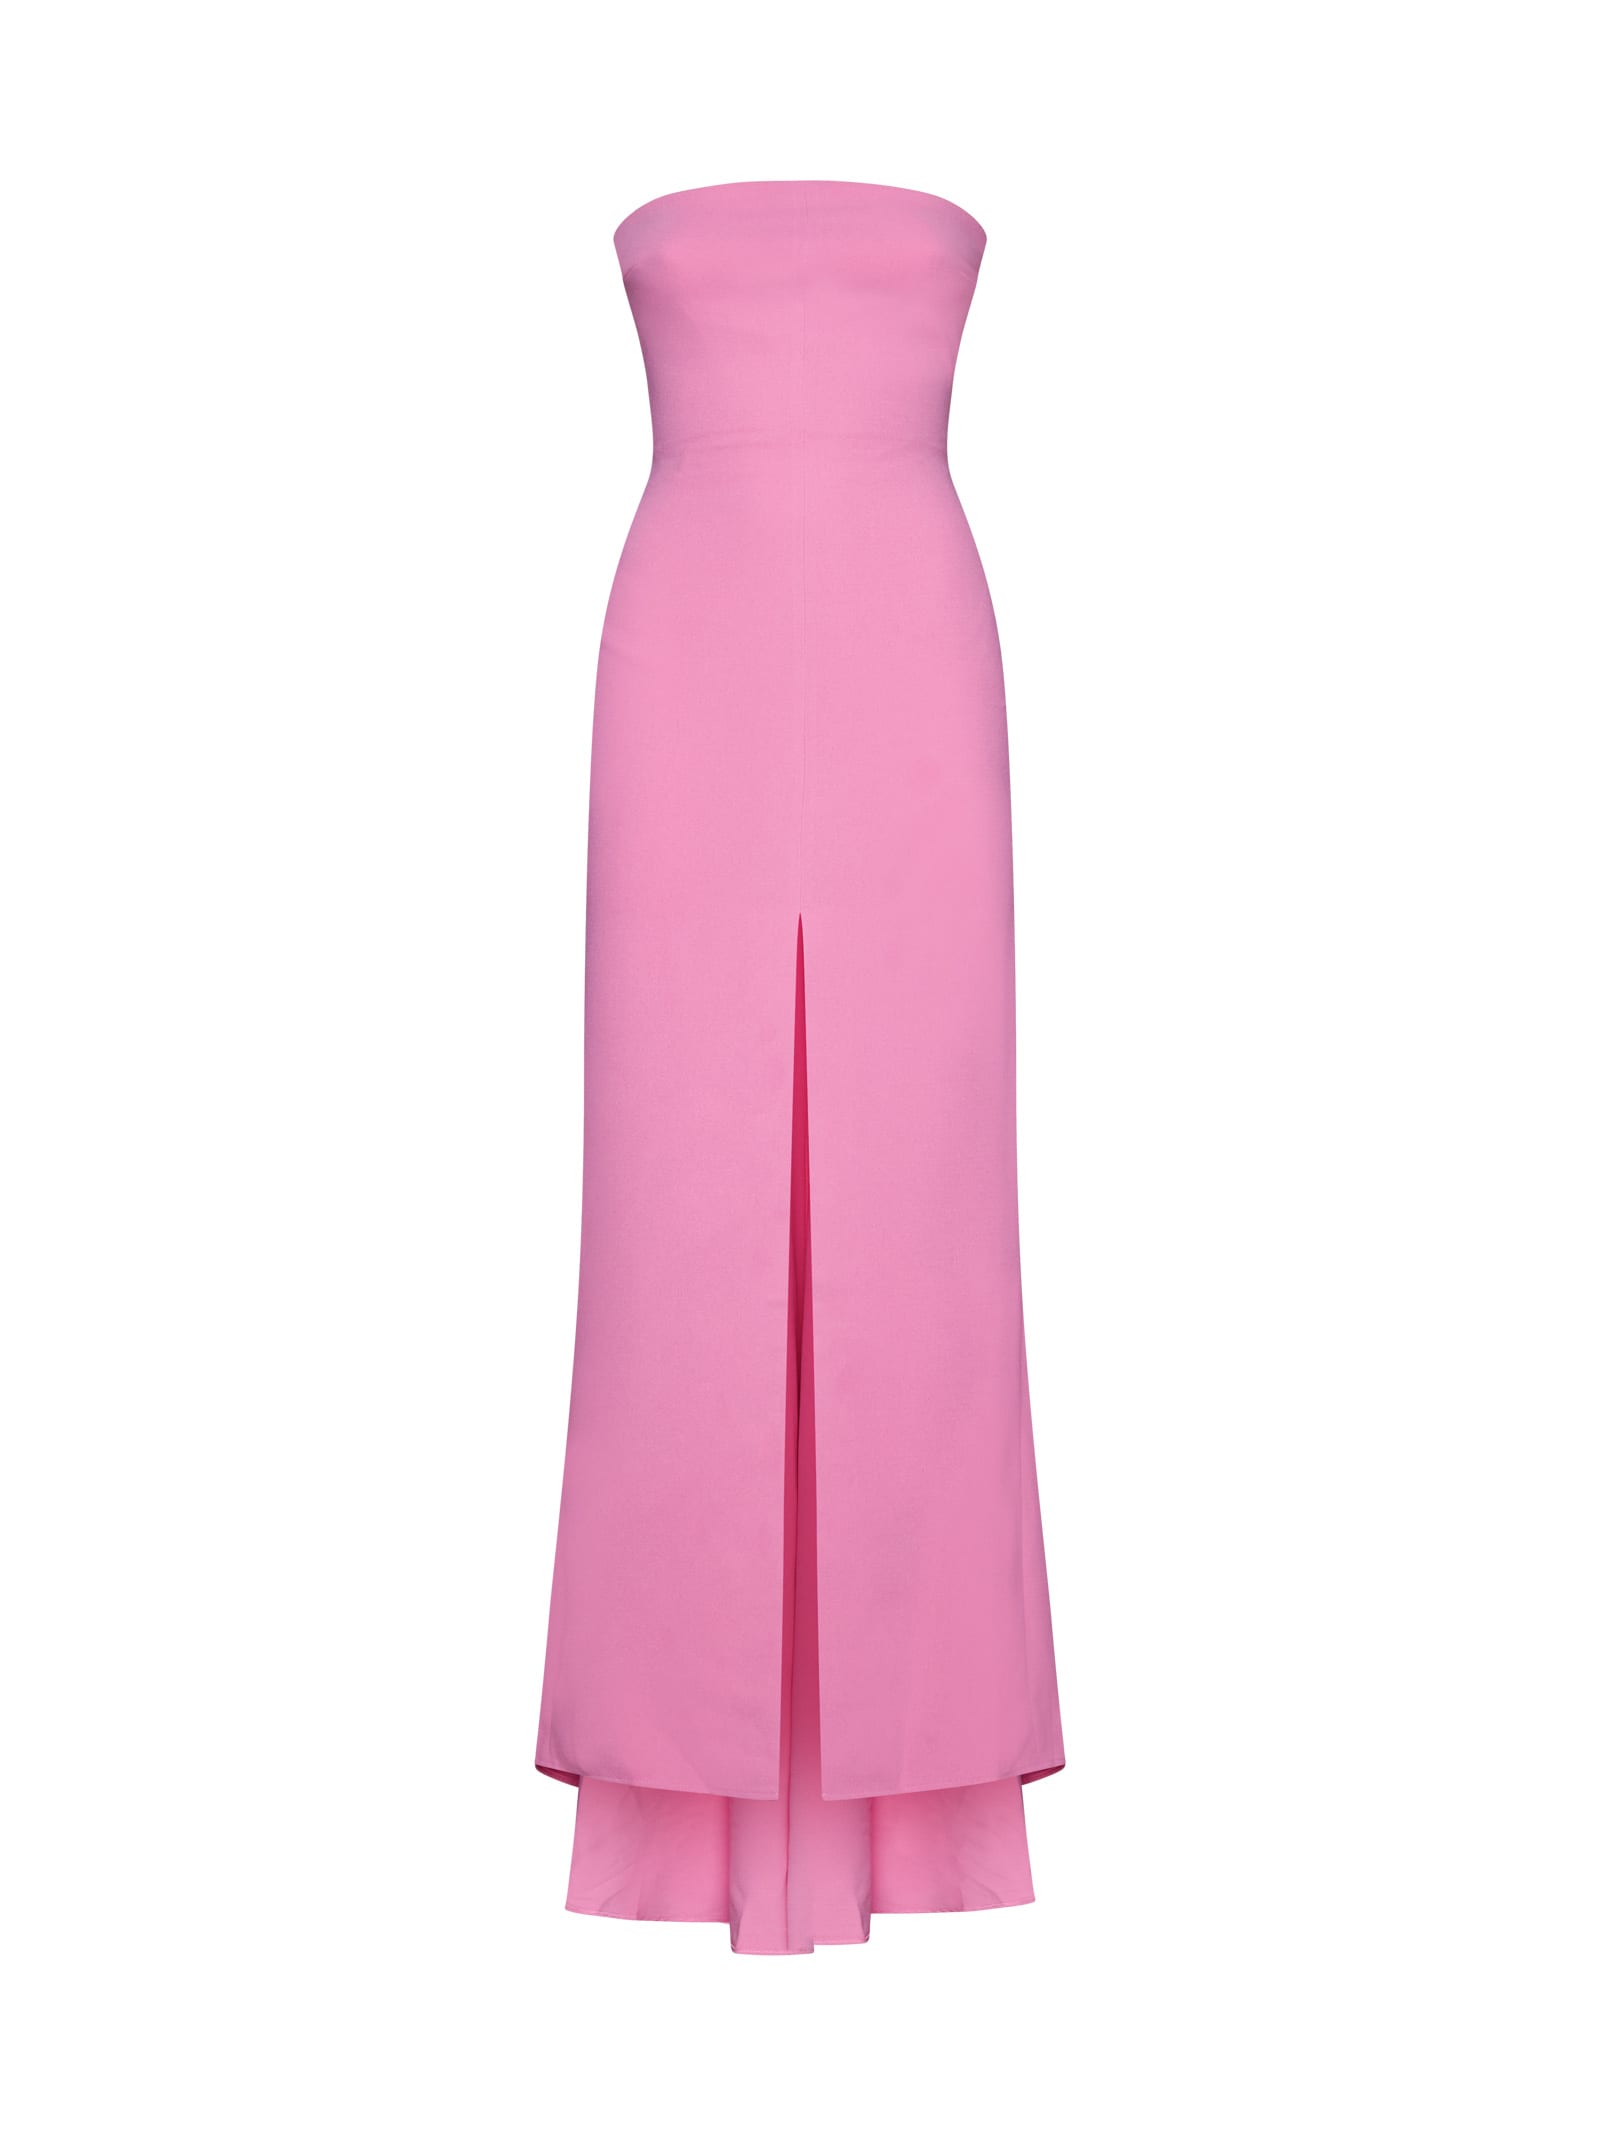 Solace London Dress In Rose Pink